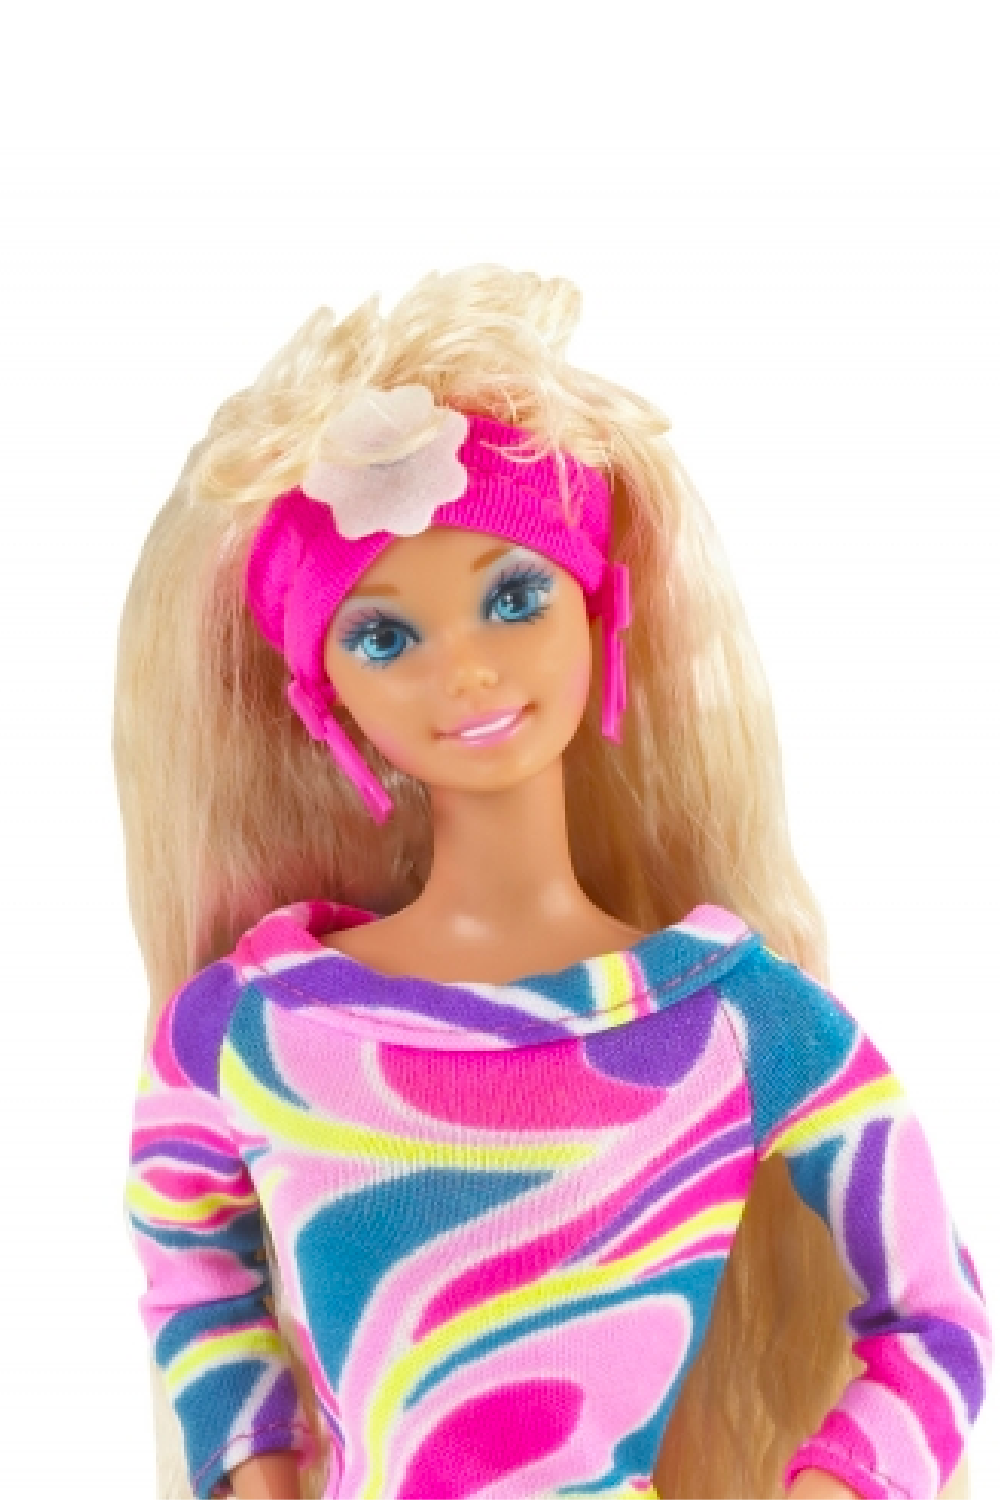 The 20 Most Expensive Barbie Probably Still Own in